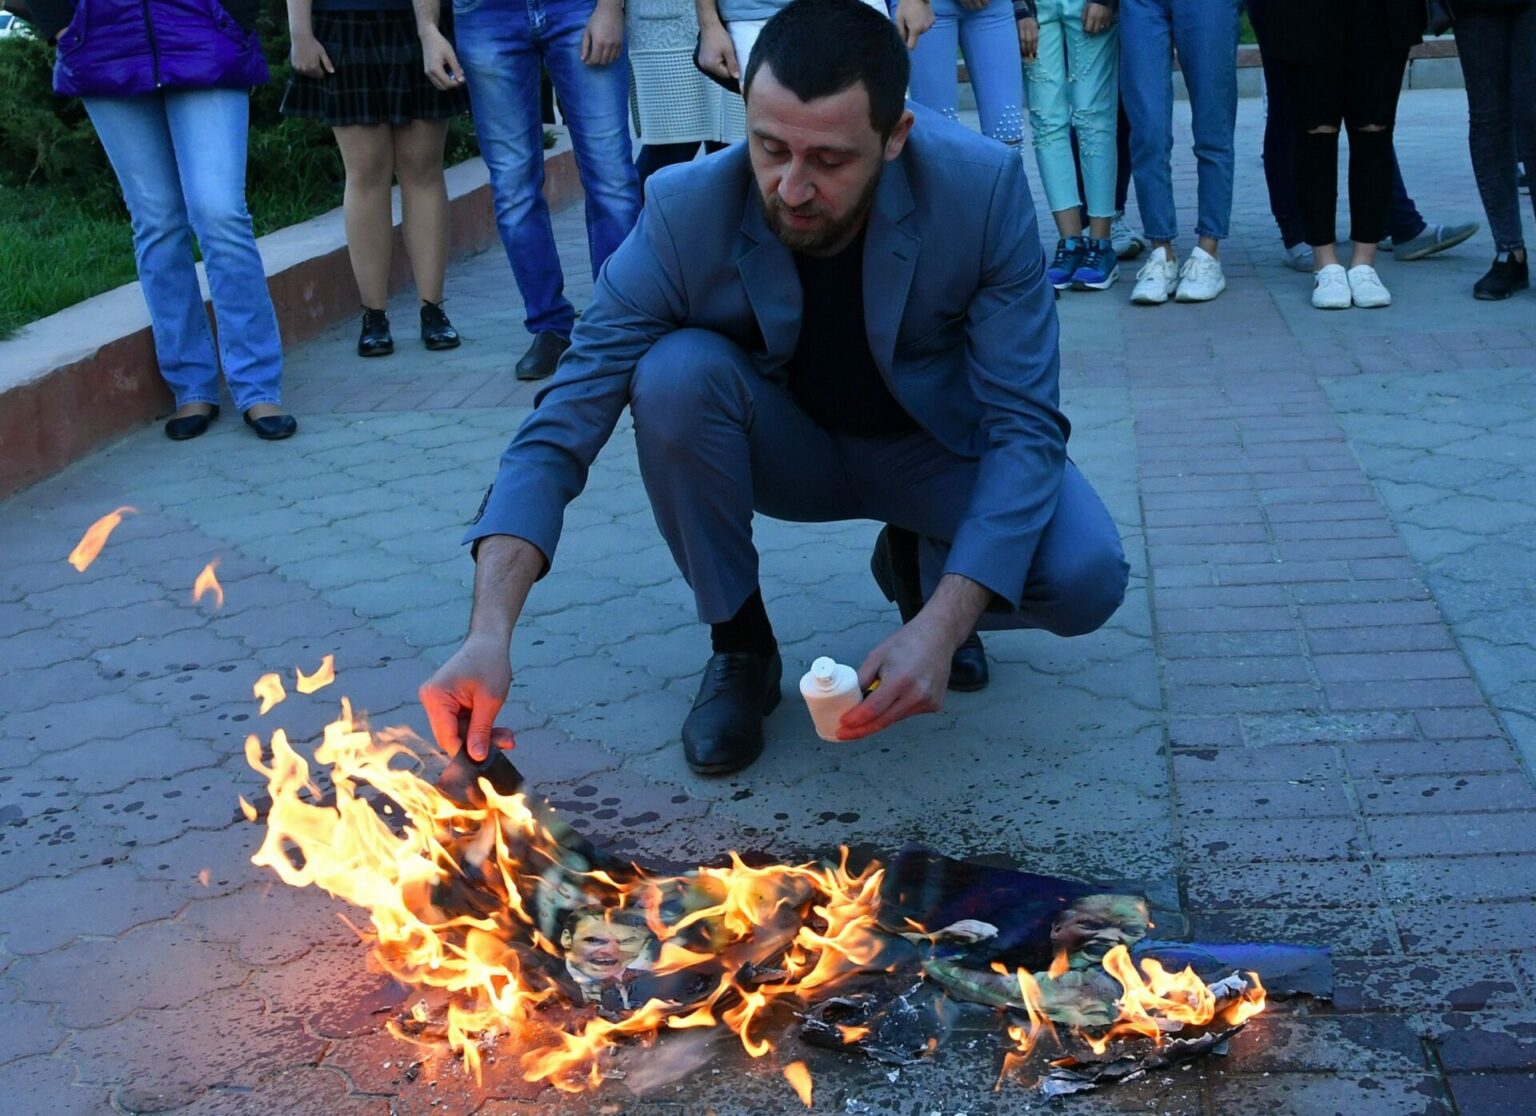 A participant in a protest in Simferopol against missile strikes on Syria burns images of US President Donald Trump, French President Emmanuel Macron and British Prime Minister Theresa May. Russian attitudes towards Donald Trump have changed since he took office.